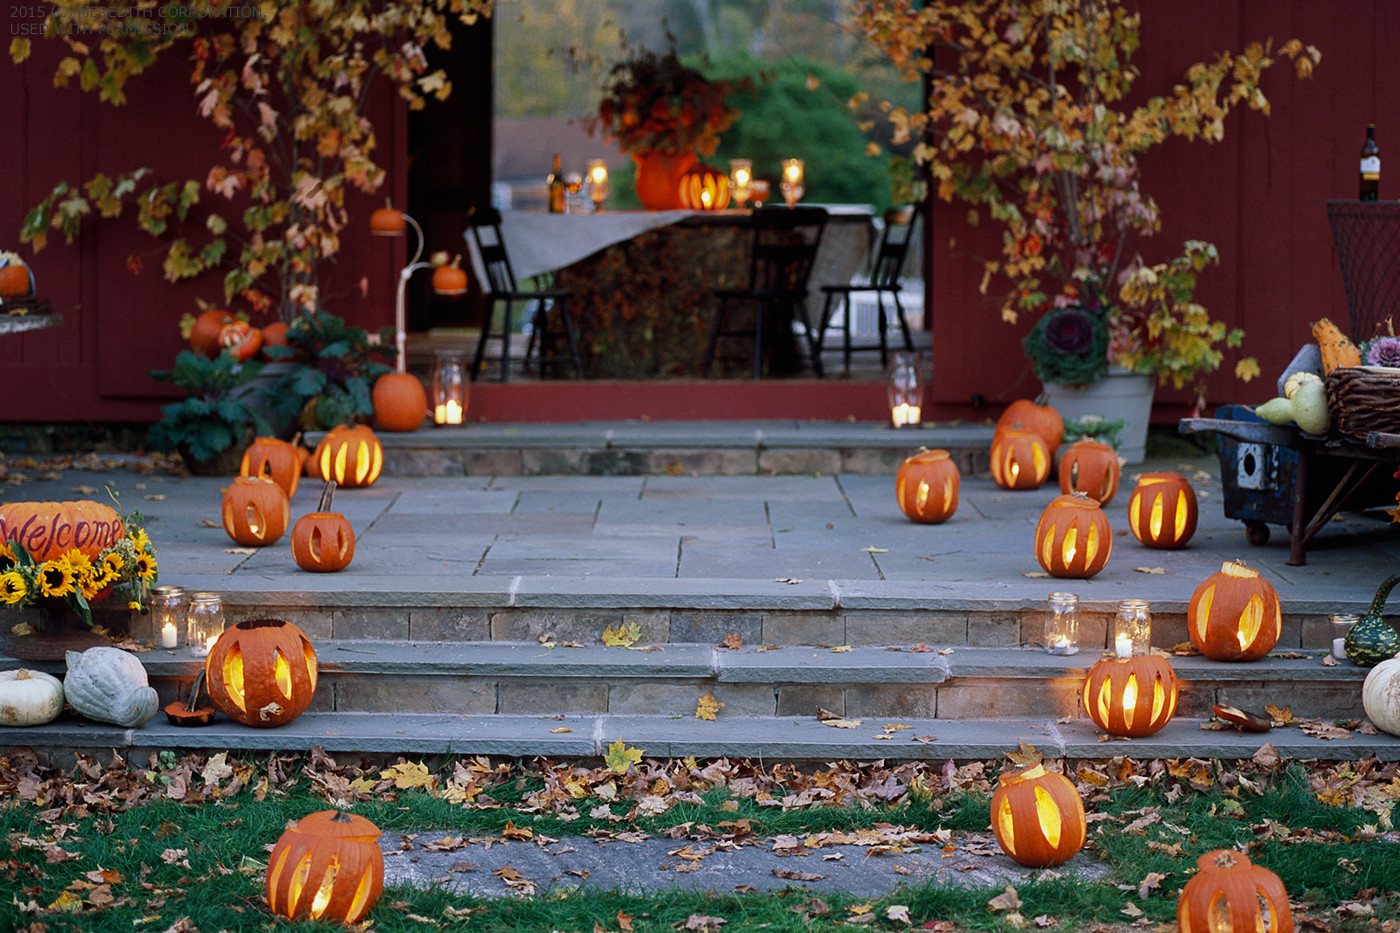 Fall Backyard Party Ideas
 How to Host a Fall Backyard Party Page 2 of 10 Better